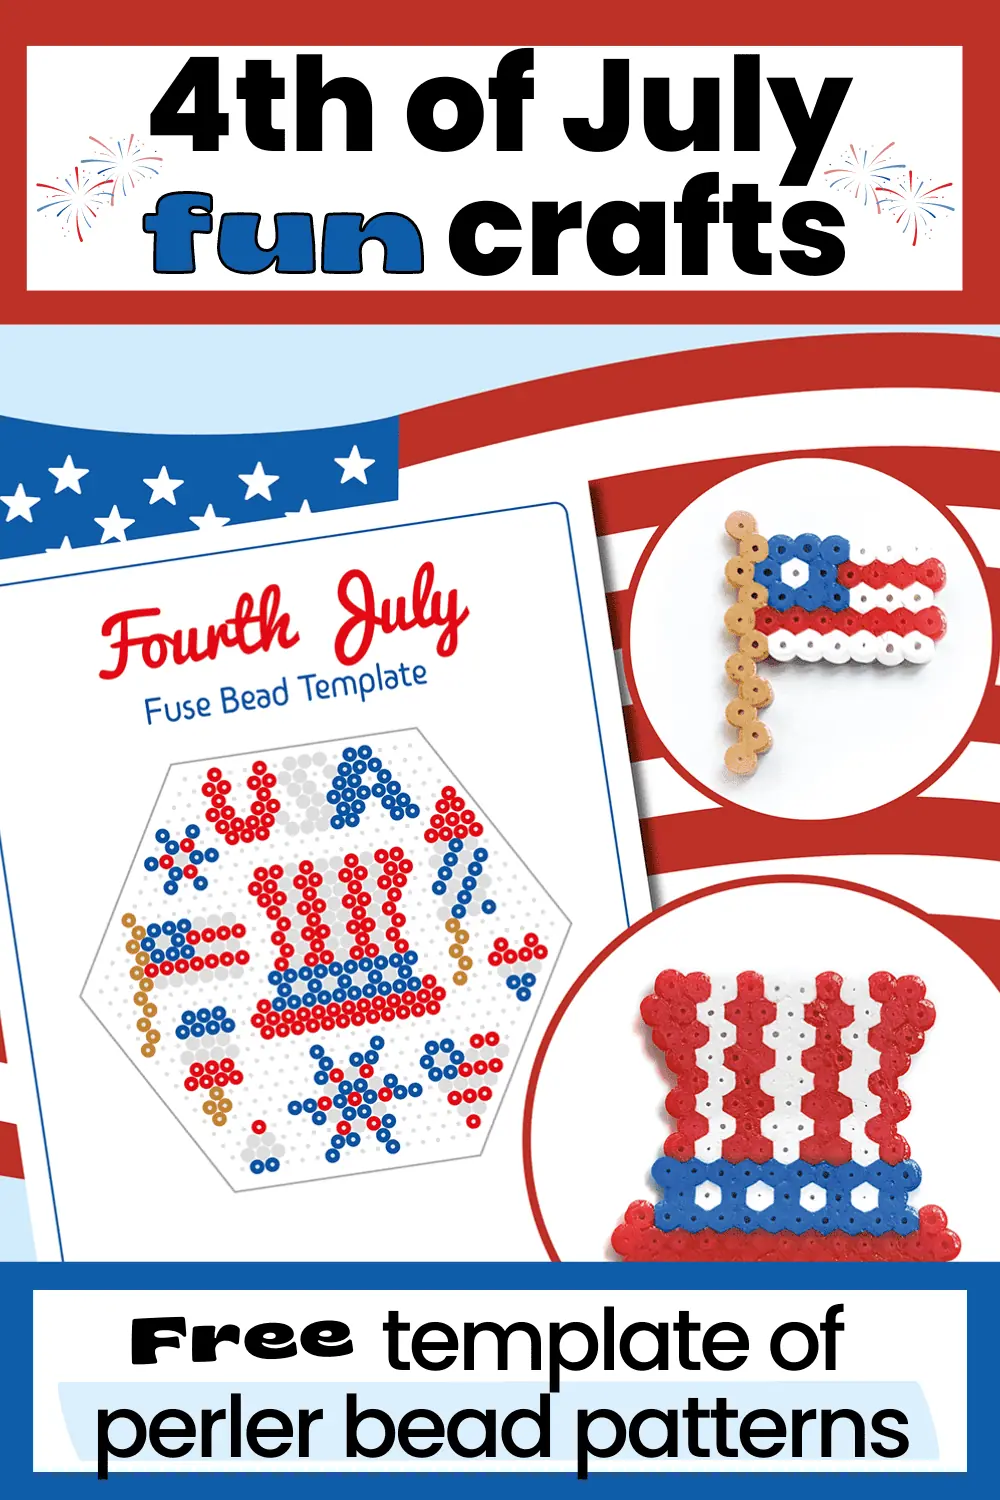 4th of July Perler Bead Patterns: Cool Ways to Have Holiday Fun with Kids (Free)